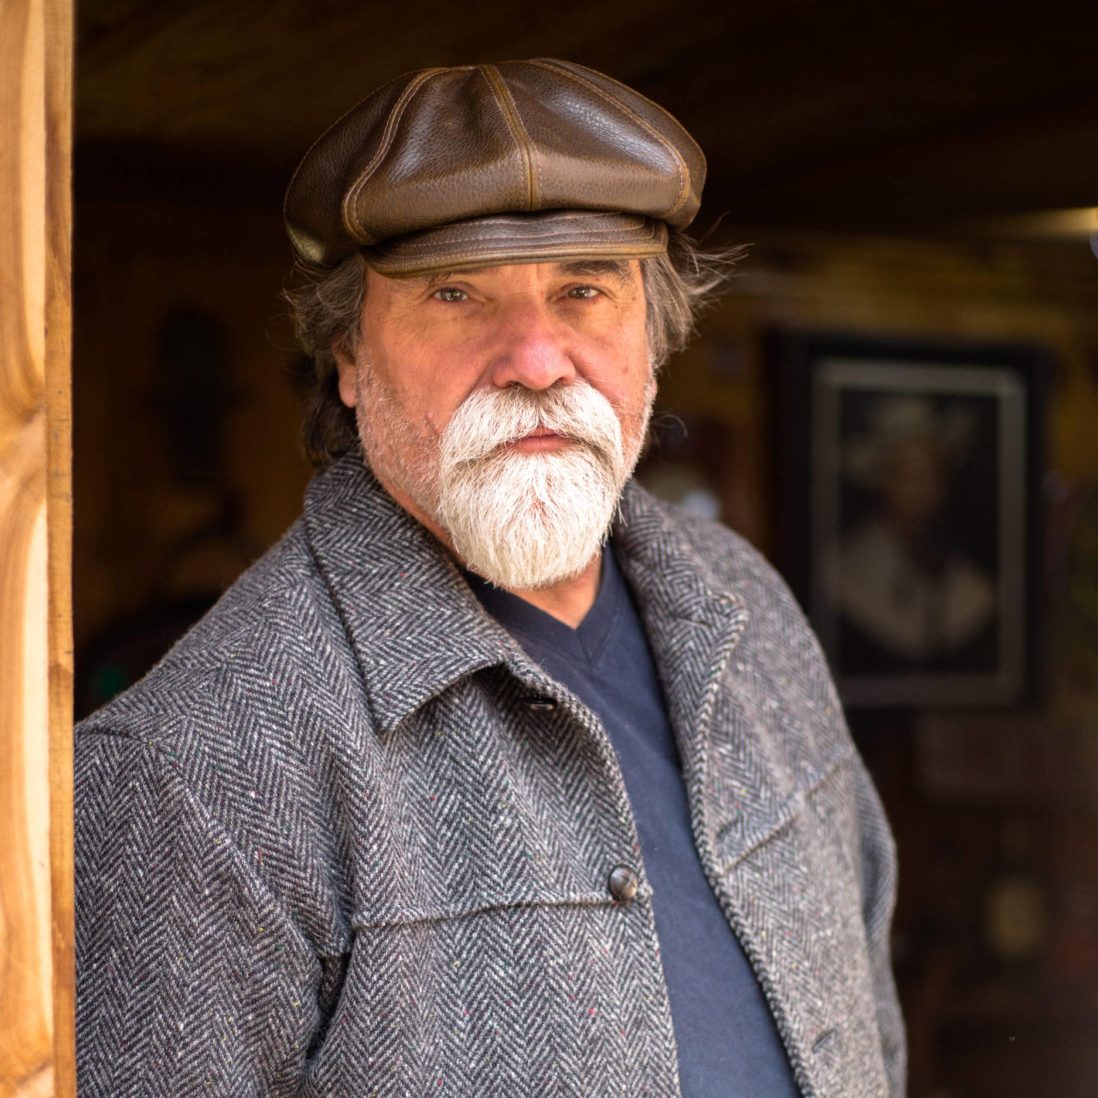 CONVERSATIONS WITH... Buddy Miller